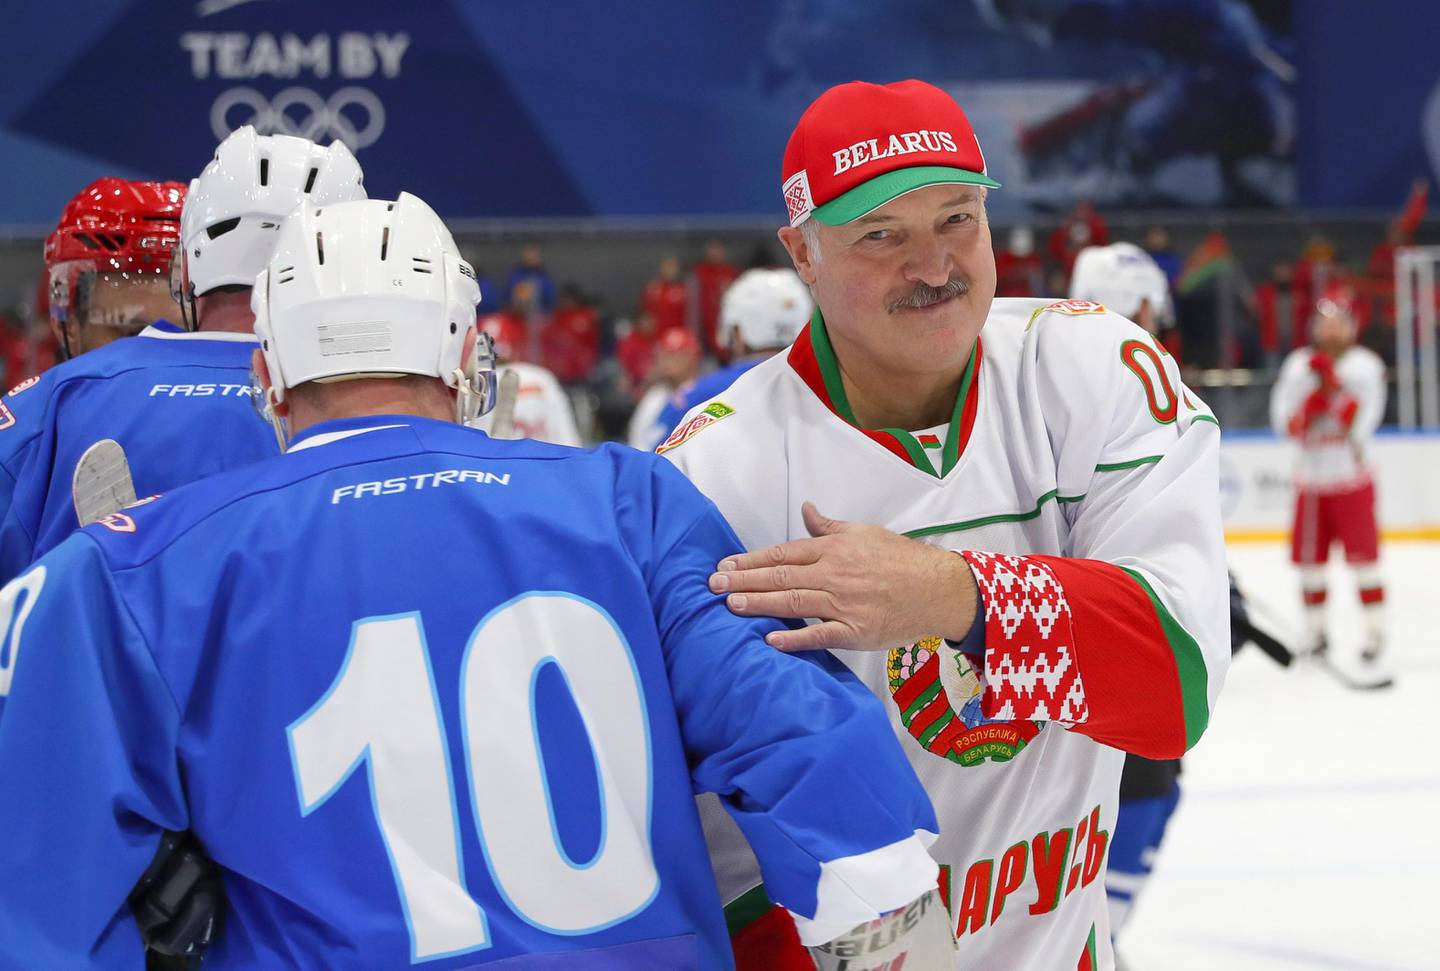 Belarusian President Alexander Lukashenko, right, takes part in a hockey match during Republican amateur competitions in Minsk, Belarus, Saturday, April 4, 2020. Amid concern about the coronavirus pandemic, Belarus' president made a public appearance in protective gear much different from the face masks and hazmat suits seen around the world. The new coronavirus causes mild or moderate symptoms for most people, but for some, especially older adults and people with existing health problems, it can cause more severe illness or death. (Andrei Pokumeiko/BelTA Pool Photo via AP)